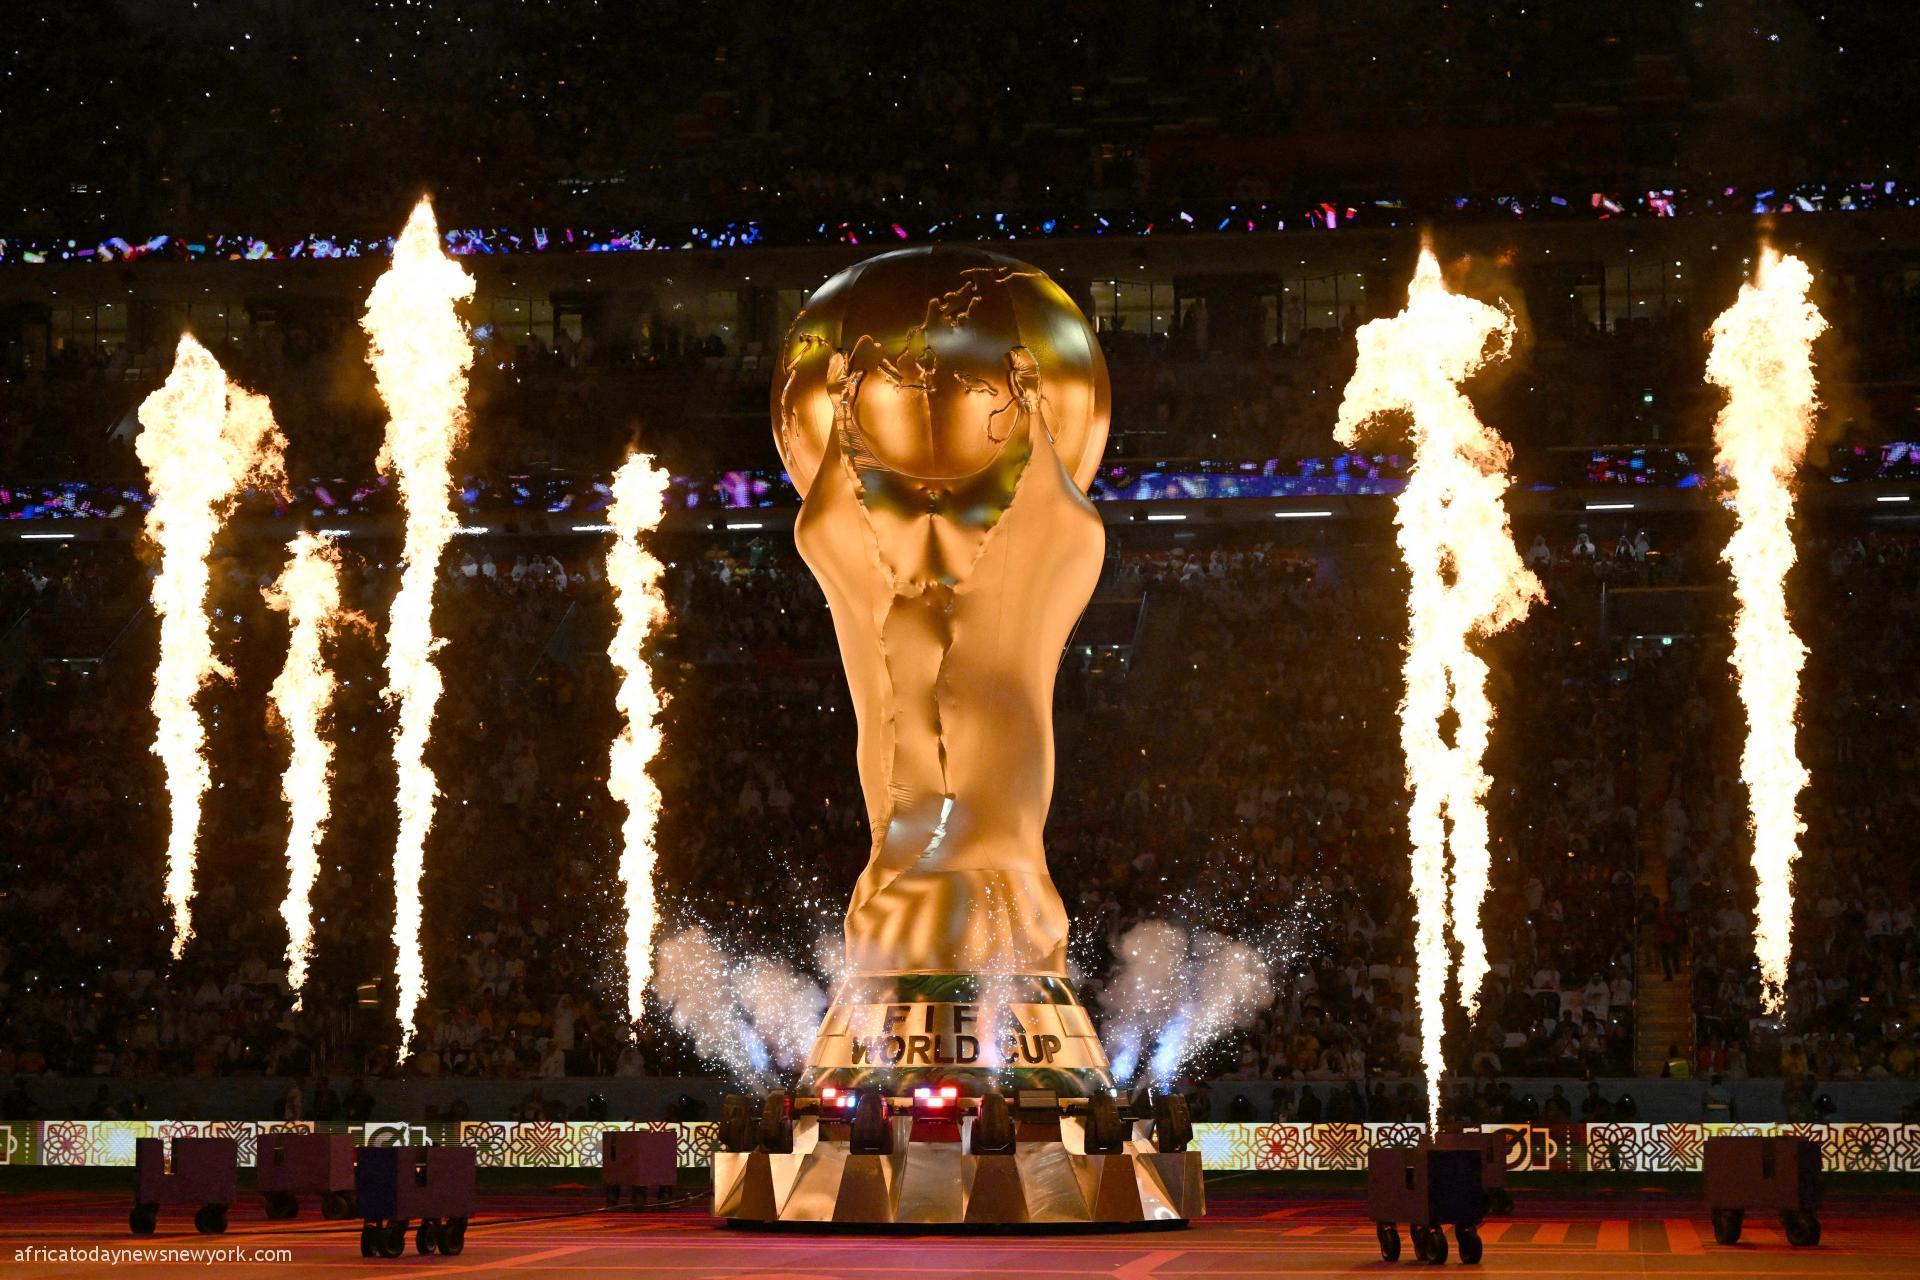 World Cup Over 2.95 Million Tickets Sold So Far - FIFA